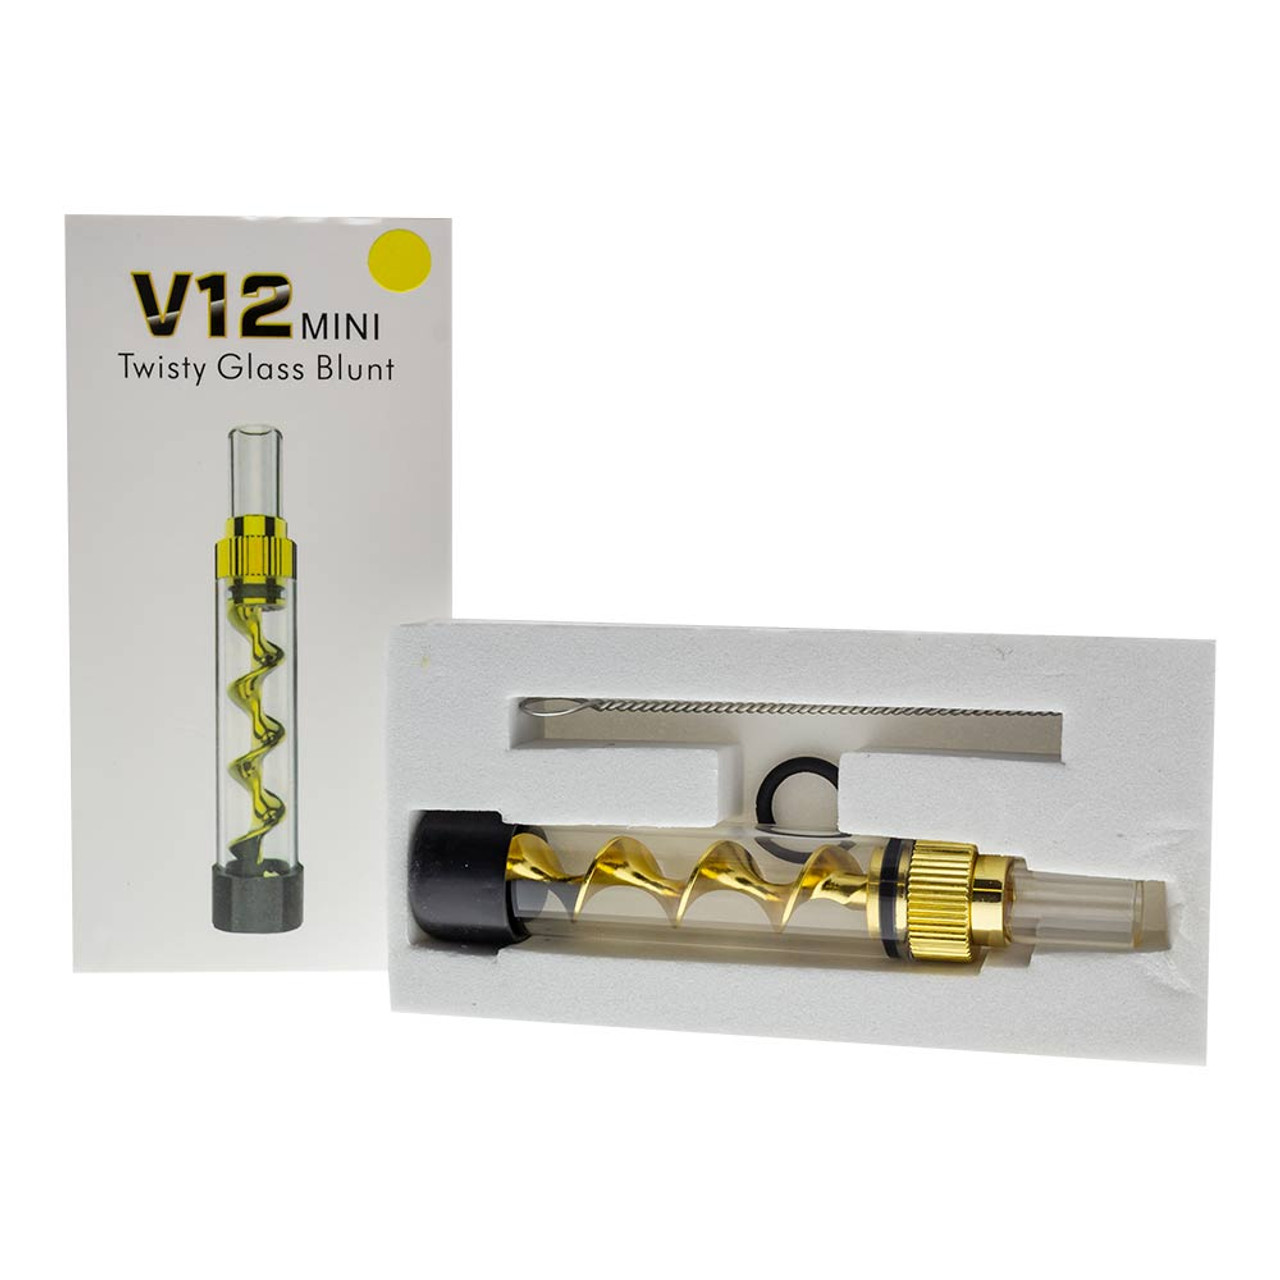 https://cdn11.bigcommerce.com/s-1n8r405nxd/images/stencil/1280x1280/products/11140/23770/80572-2-V12_Twisty_Blunt_Glass_Pipe_Travel_Discrete_Small_Mini_Gold-Cheap_Online_Smokeshop_Wholesale__91017.1675448300.jpg?c=2